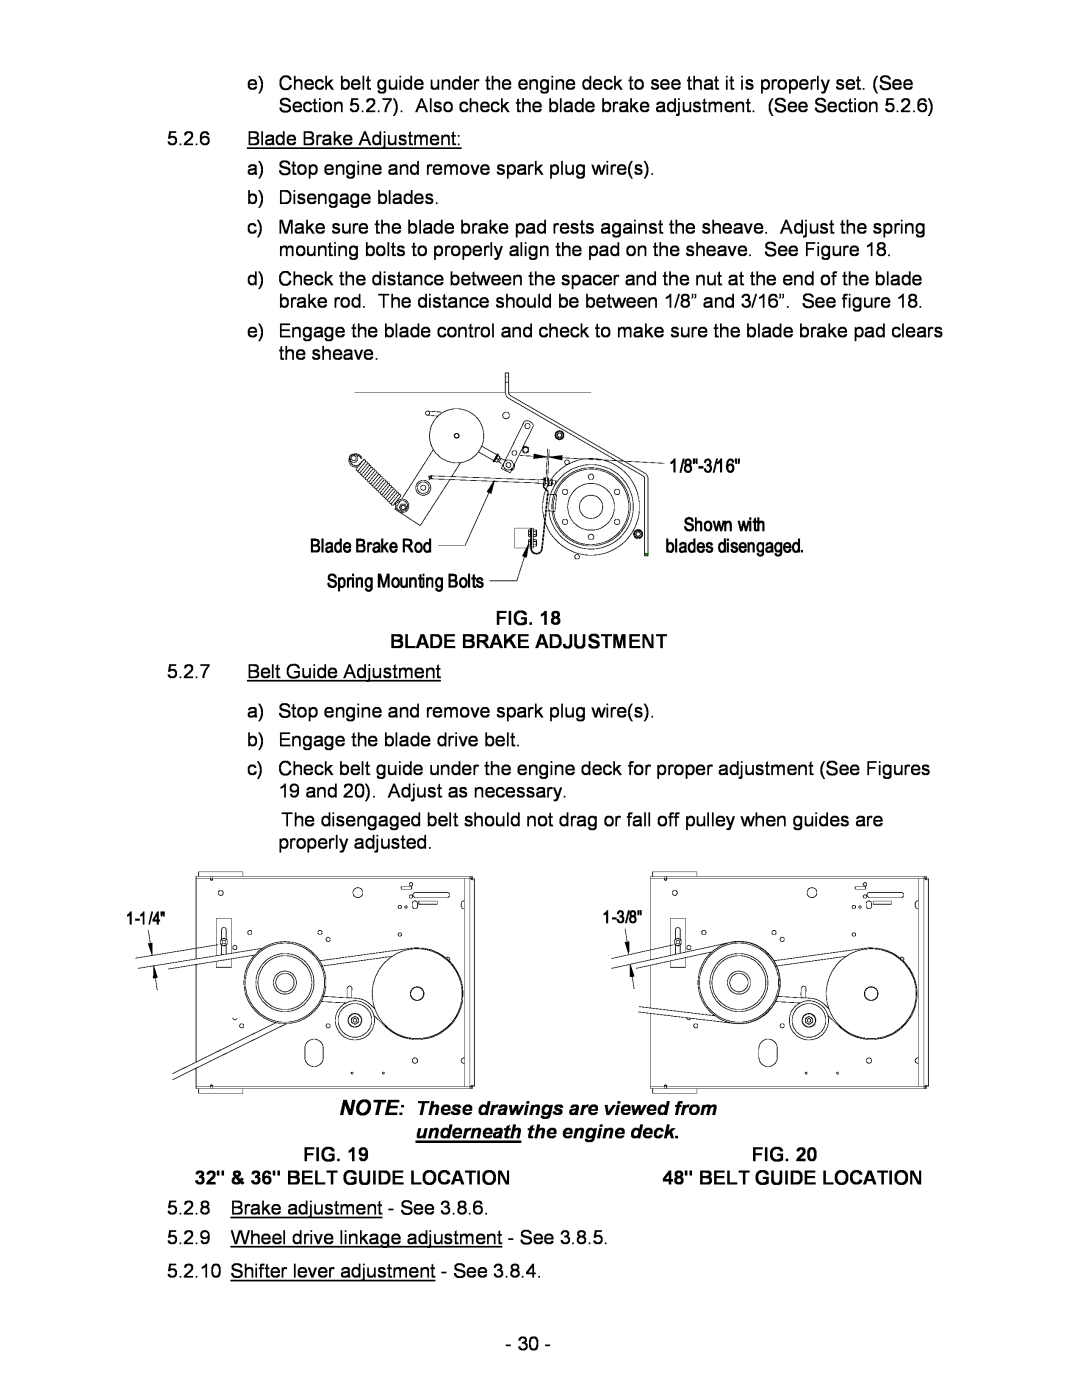 Exmark Metro manual Blade Brake Adjustment, NOTE These drawings are viewed from underneath the engine deck 